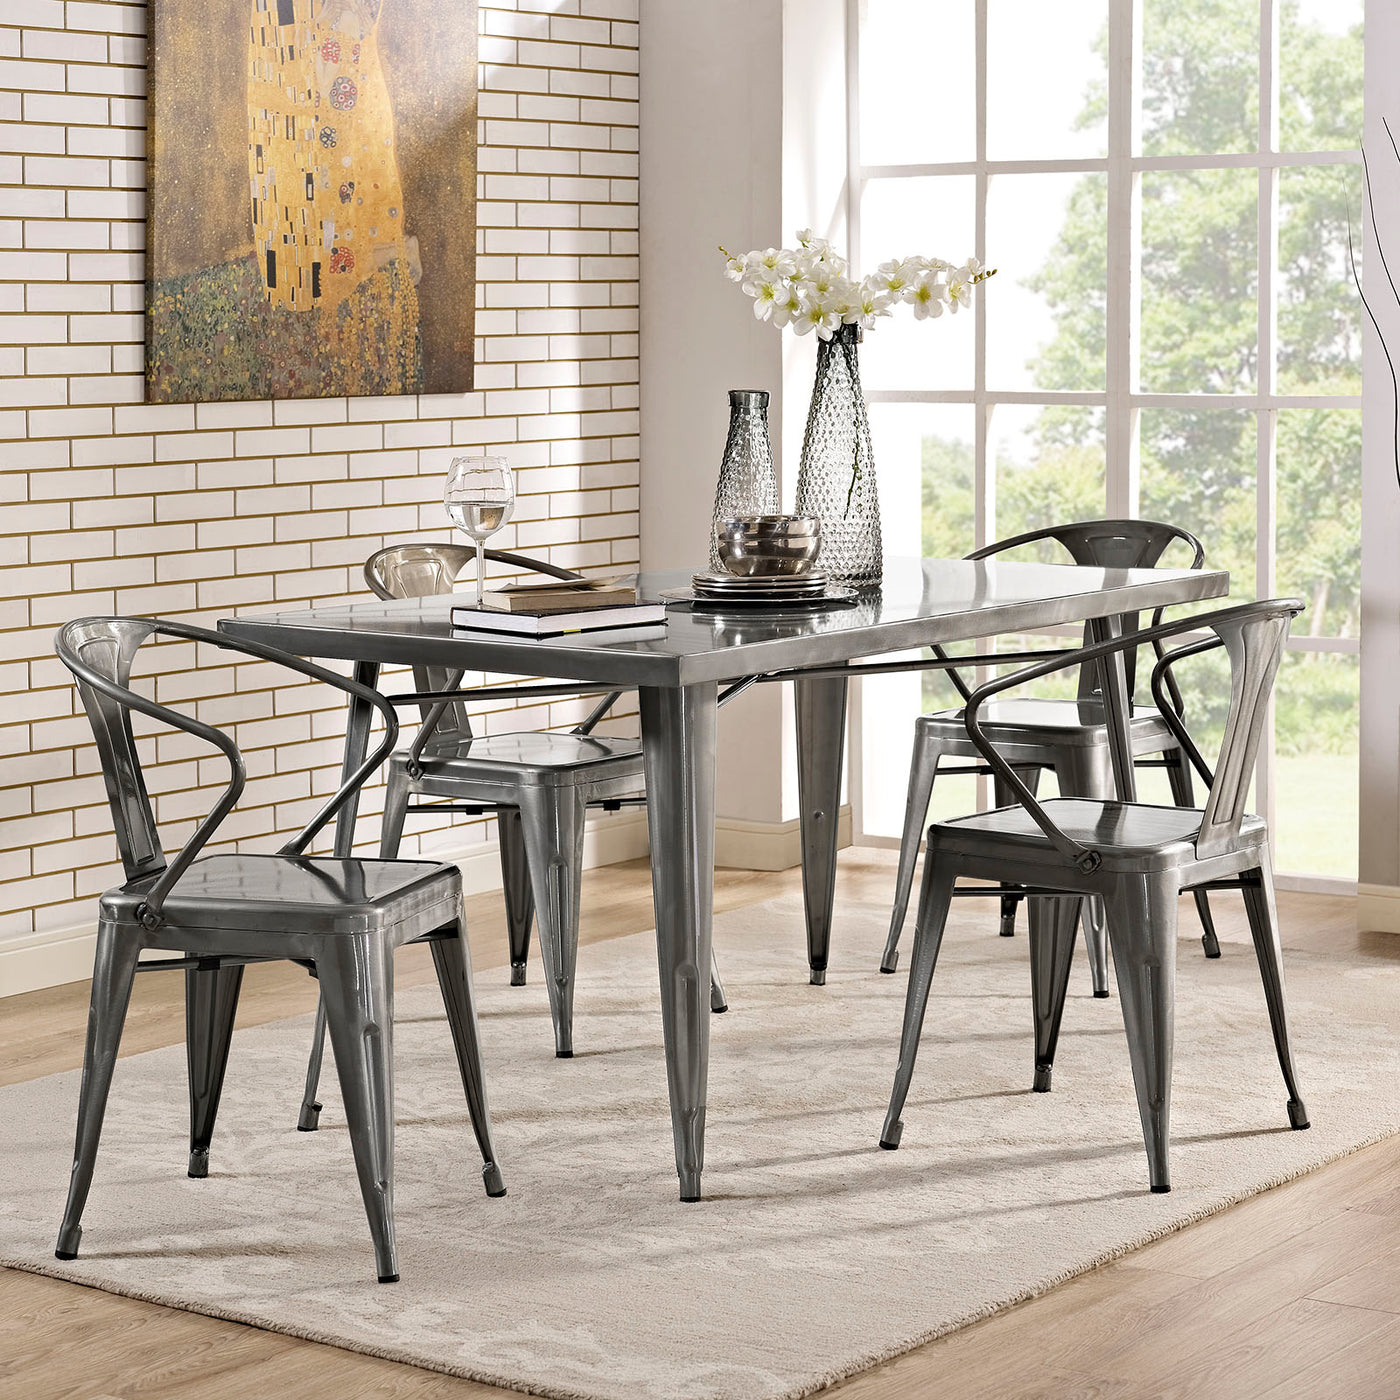 Alacrity Rectangle Metal Dining Table